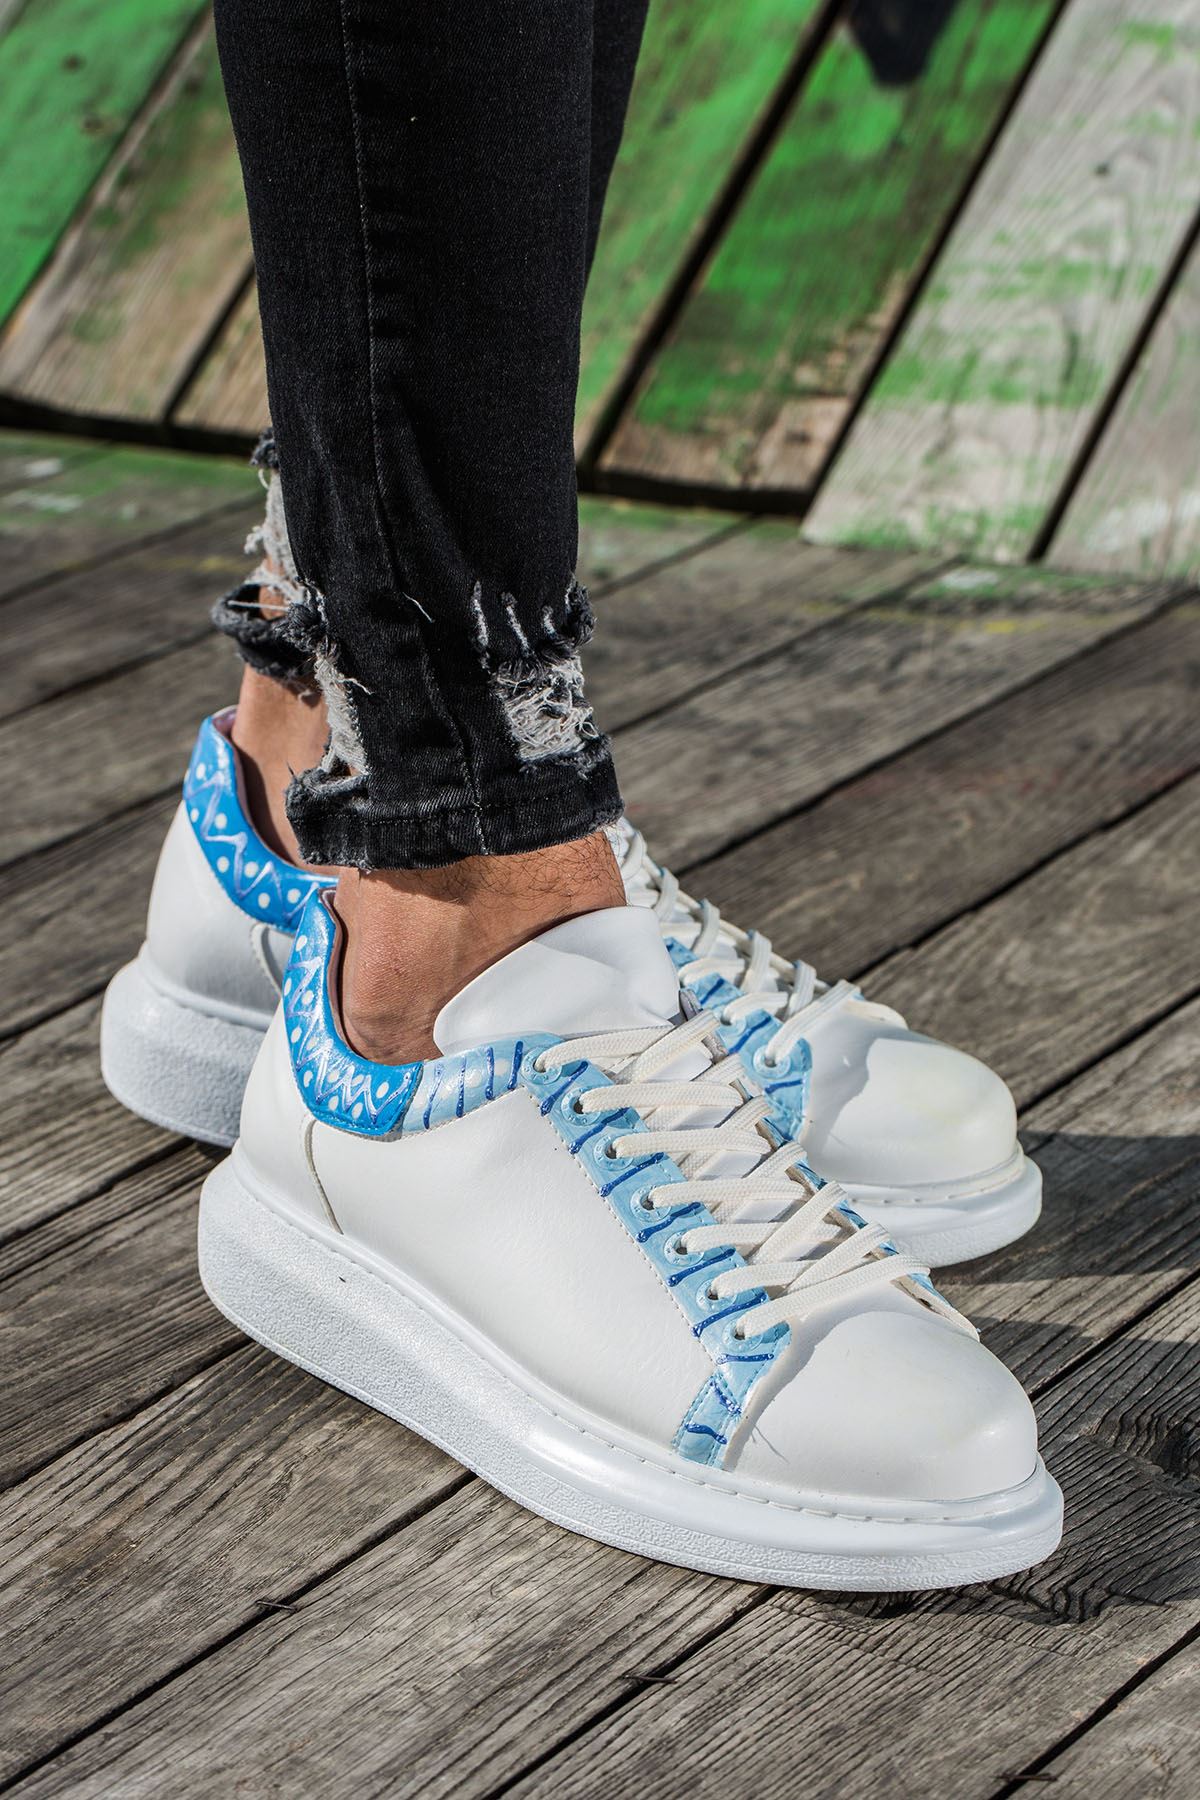 Chekich Men's and Women's Sneakers White Blue Spray Mixed Color Written Lace-up Splash Pattern Unisex Shoes Odorless Daily Weather Comfortable Lovers Different Options Hiking Spring Summer Autumn Seasons CH254 - 416